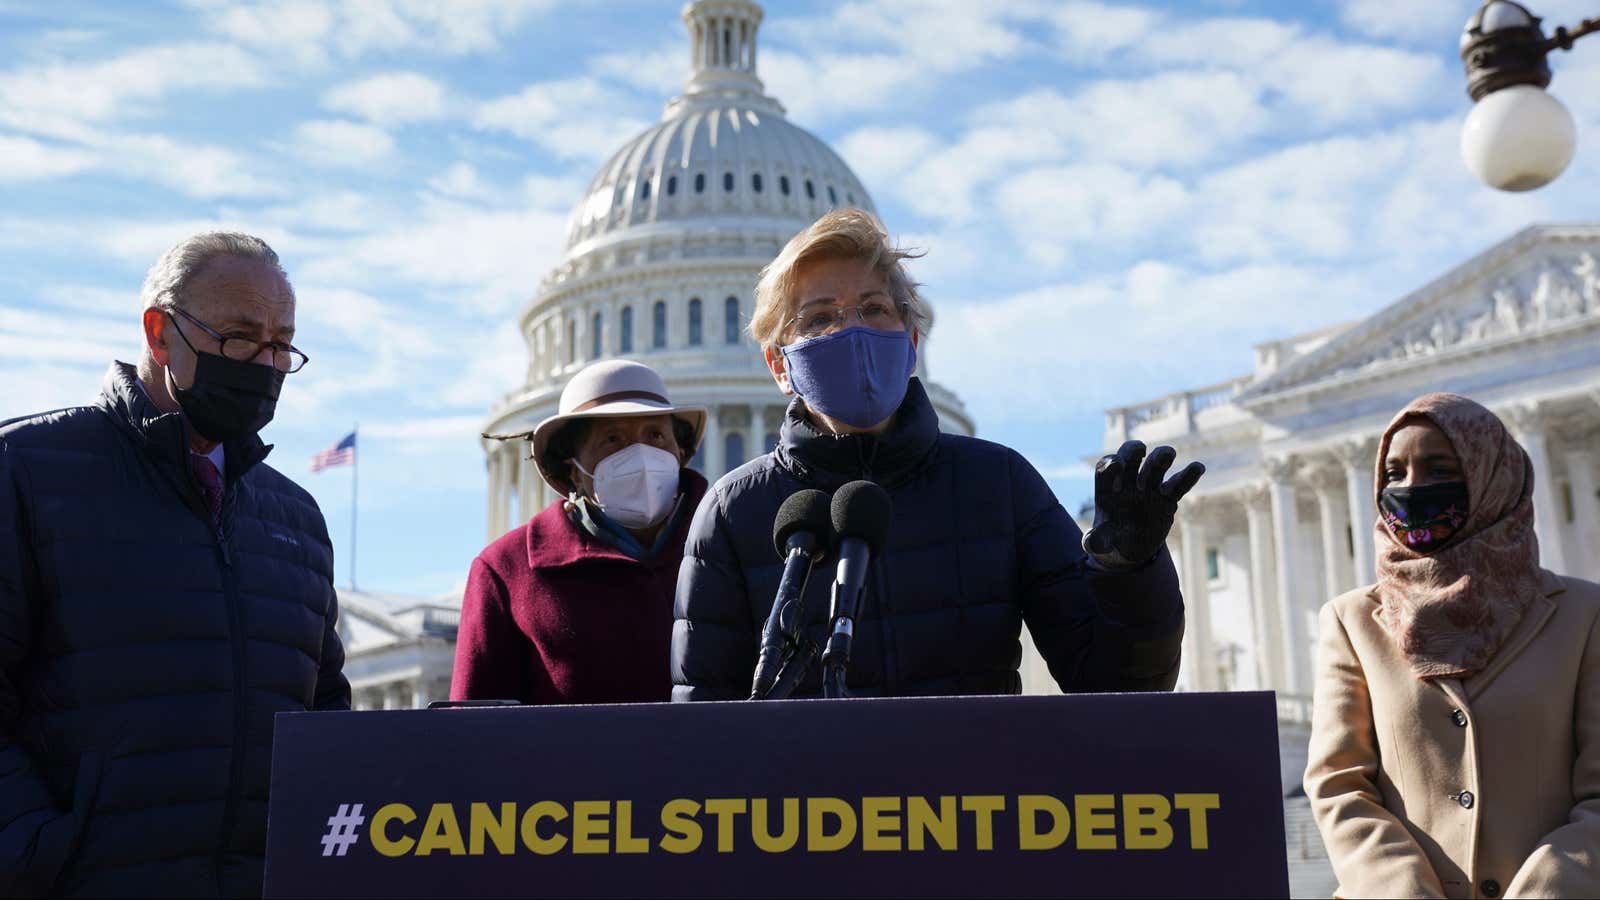 As it stands, most student loan debt will still exist next year.